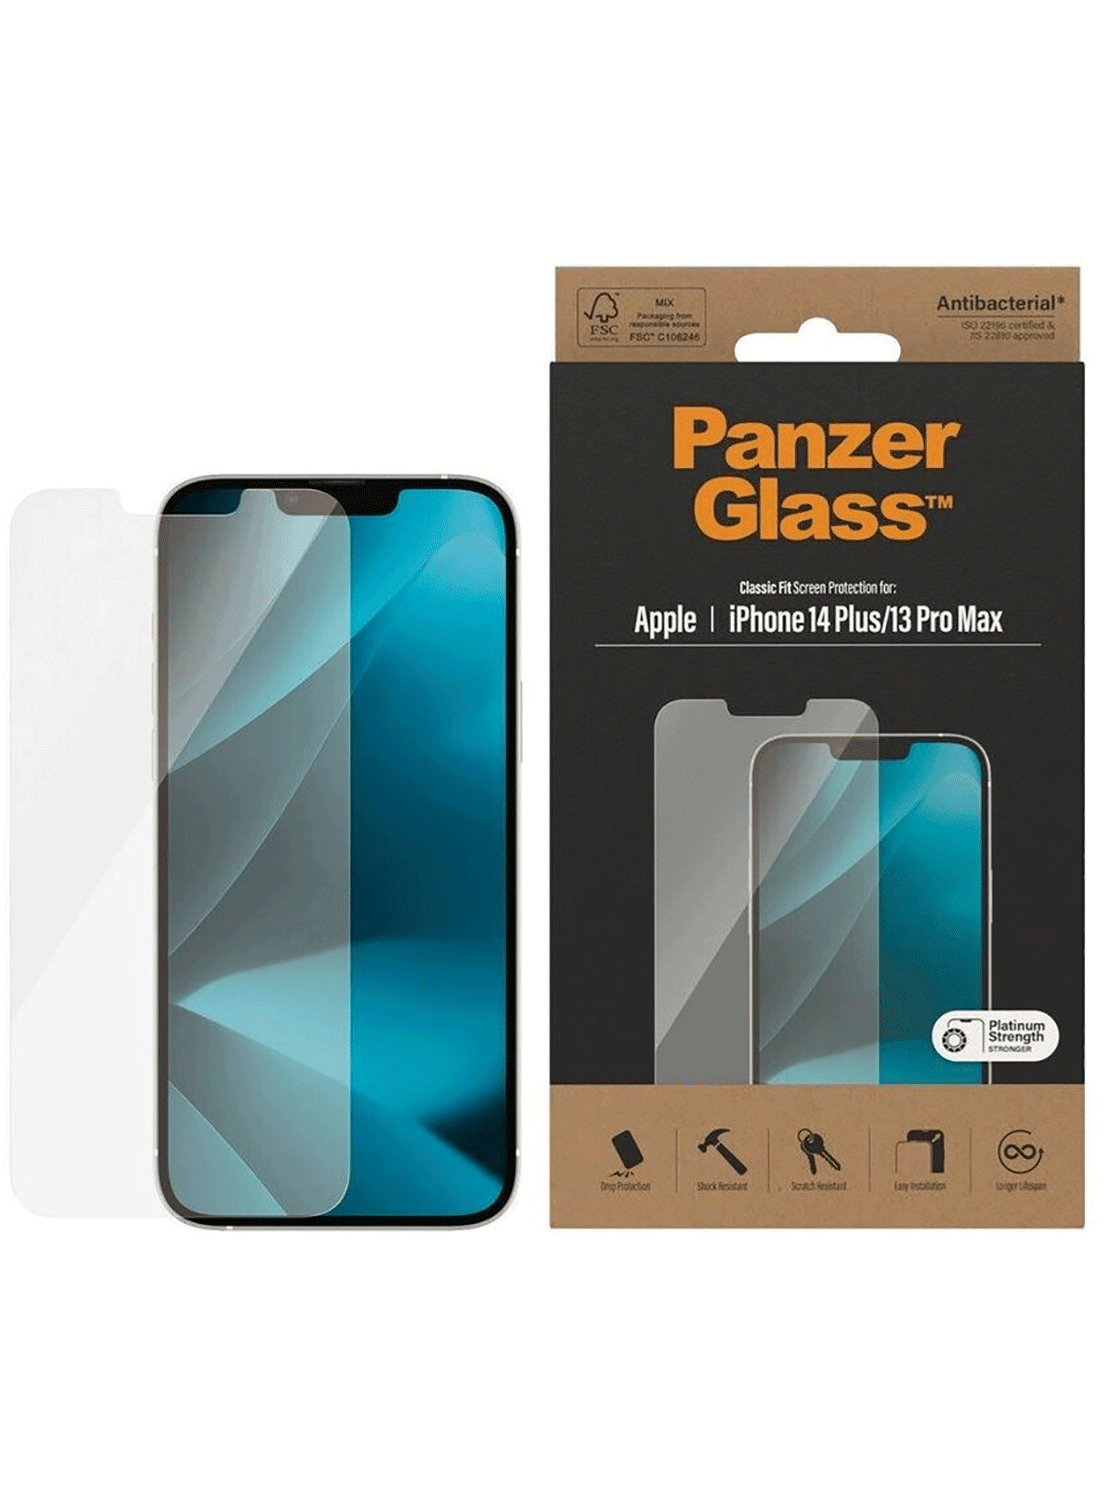 PanzerGlass Classic Fit Screen Protector iPhone 14 Plus / 13 Pro Max - CarbonPhone